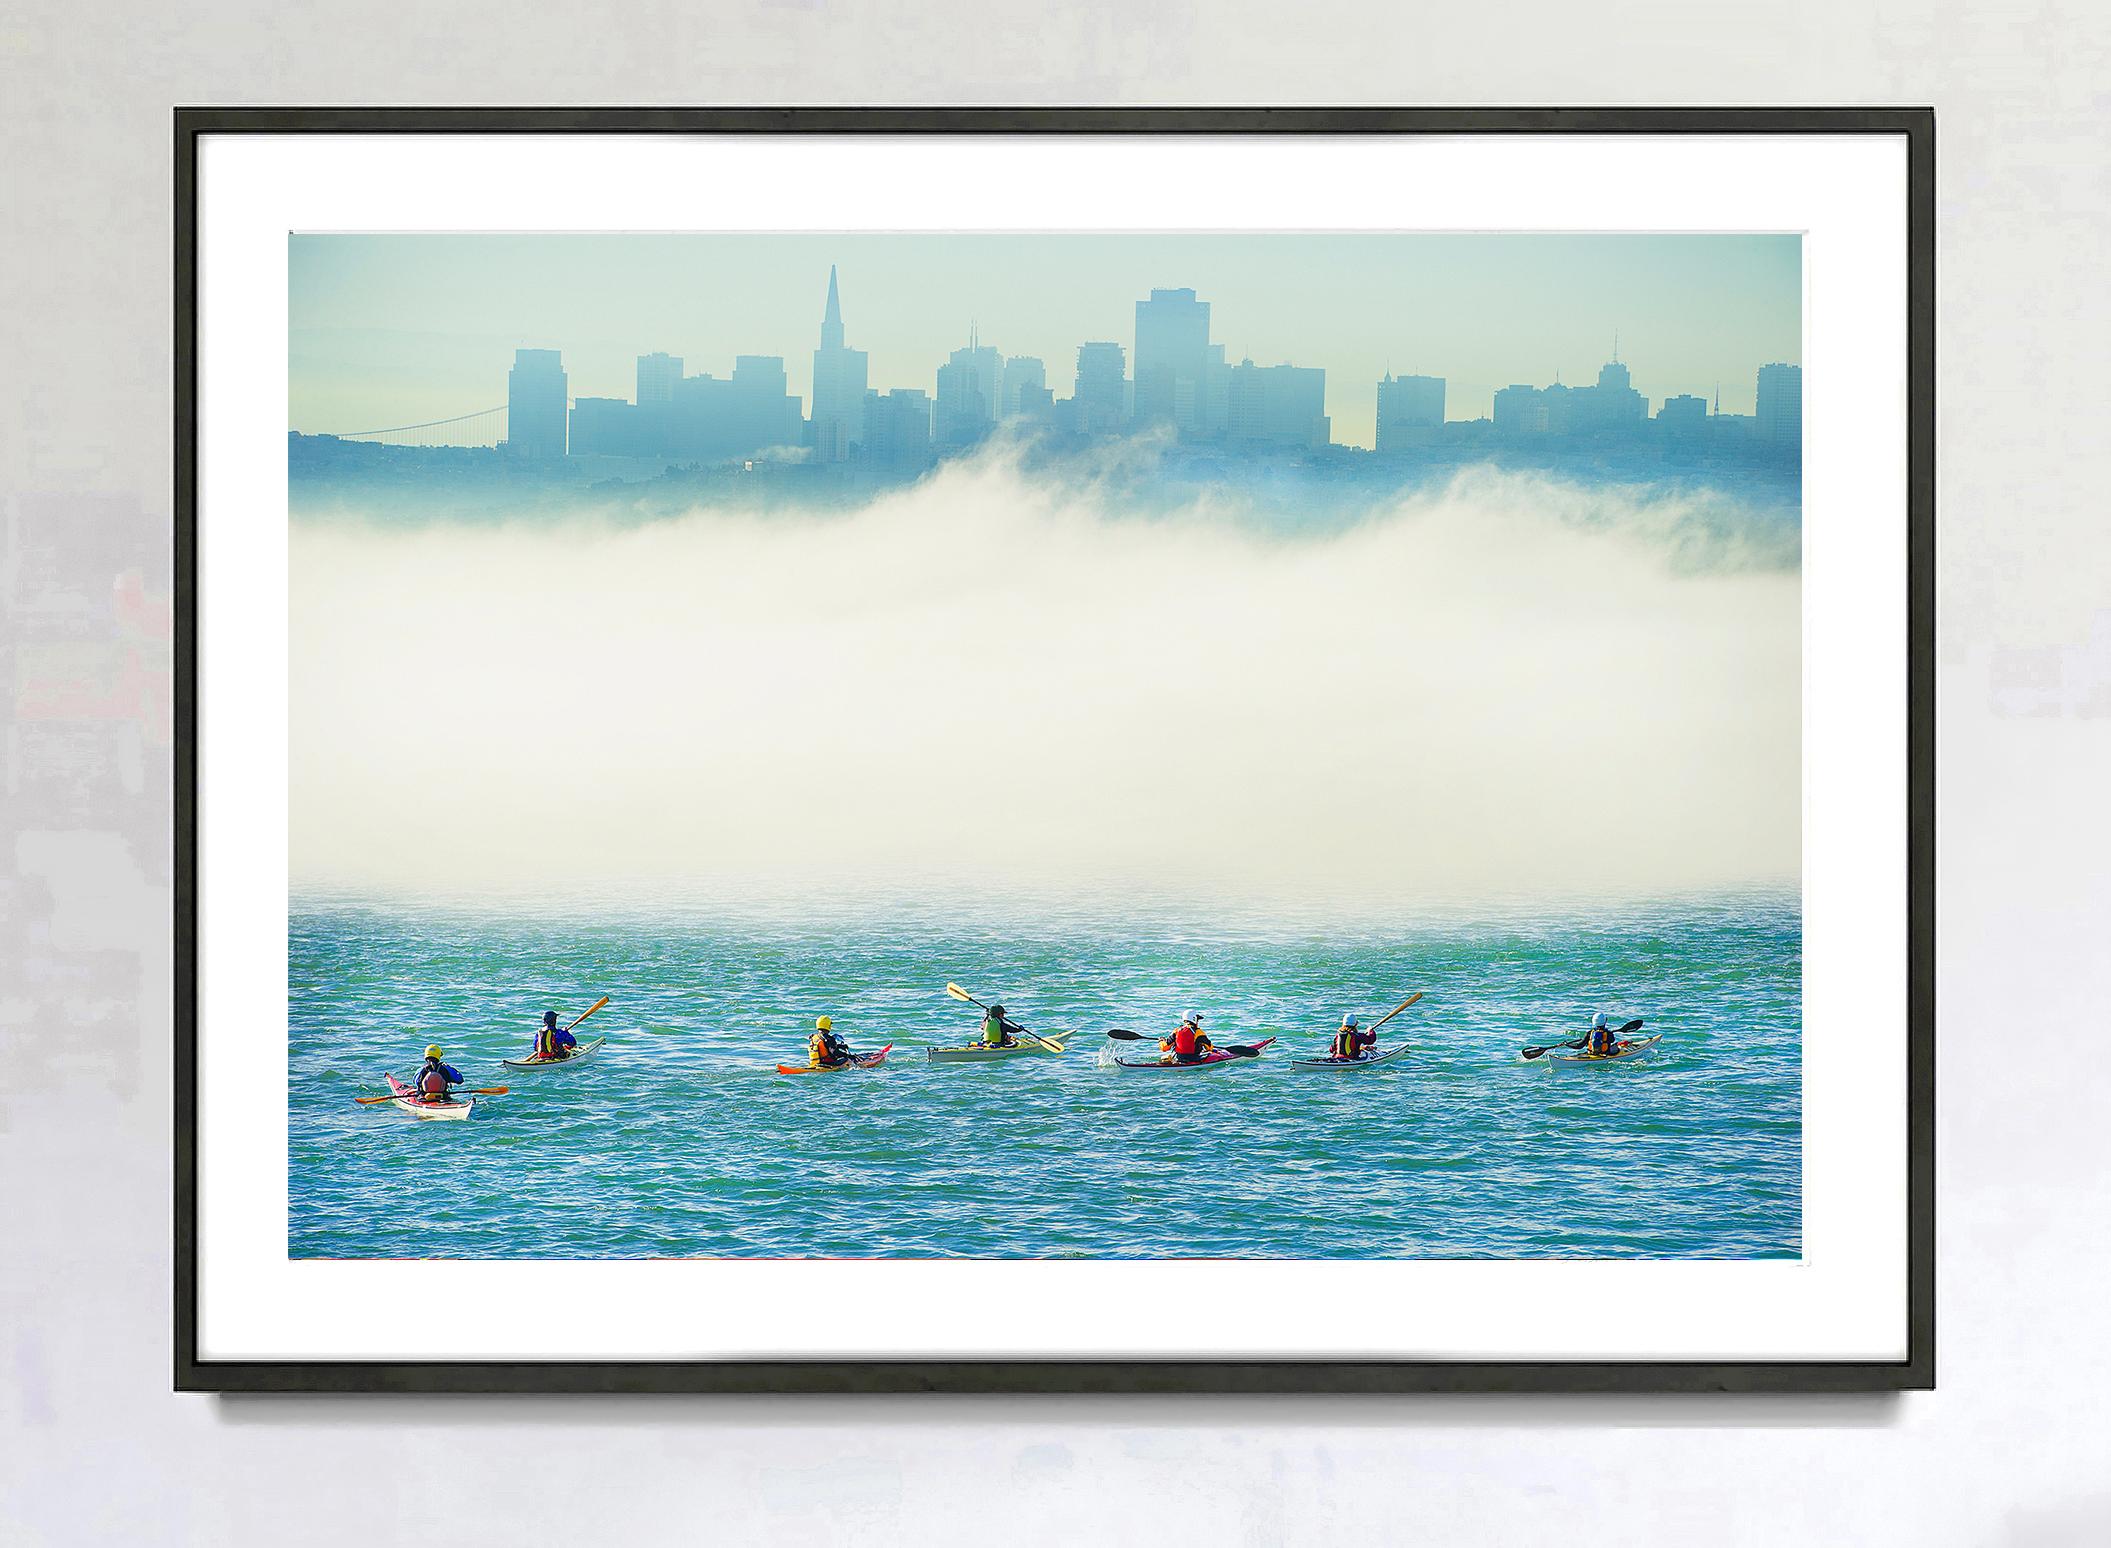 Surreal Kayak Party in Foggy Metaphysical San Francisco Bay with Muted Skyline - Photograph by Mitchell Funk